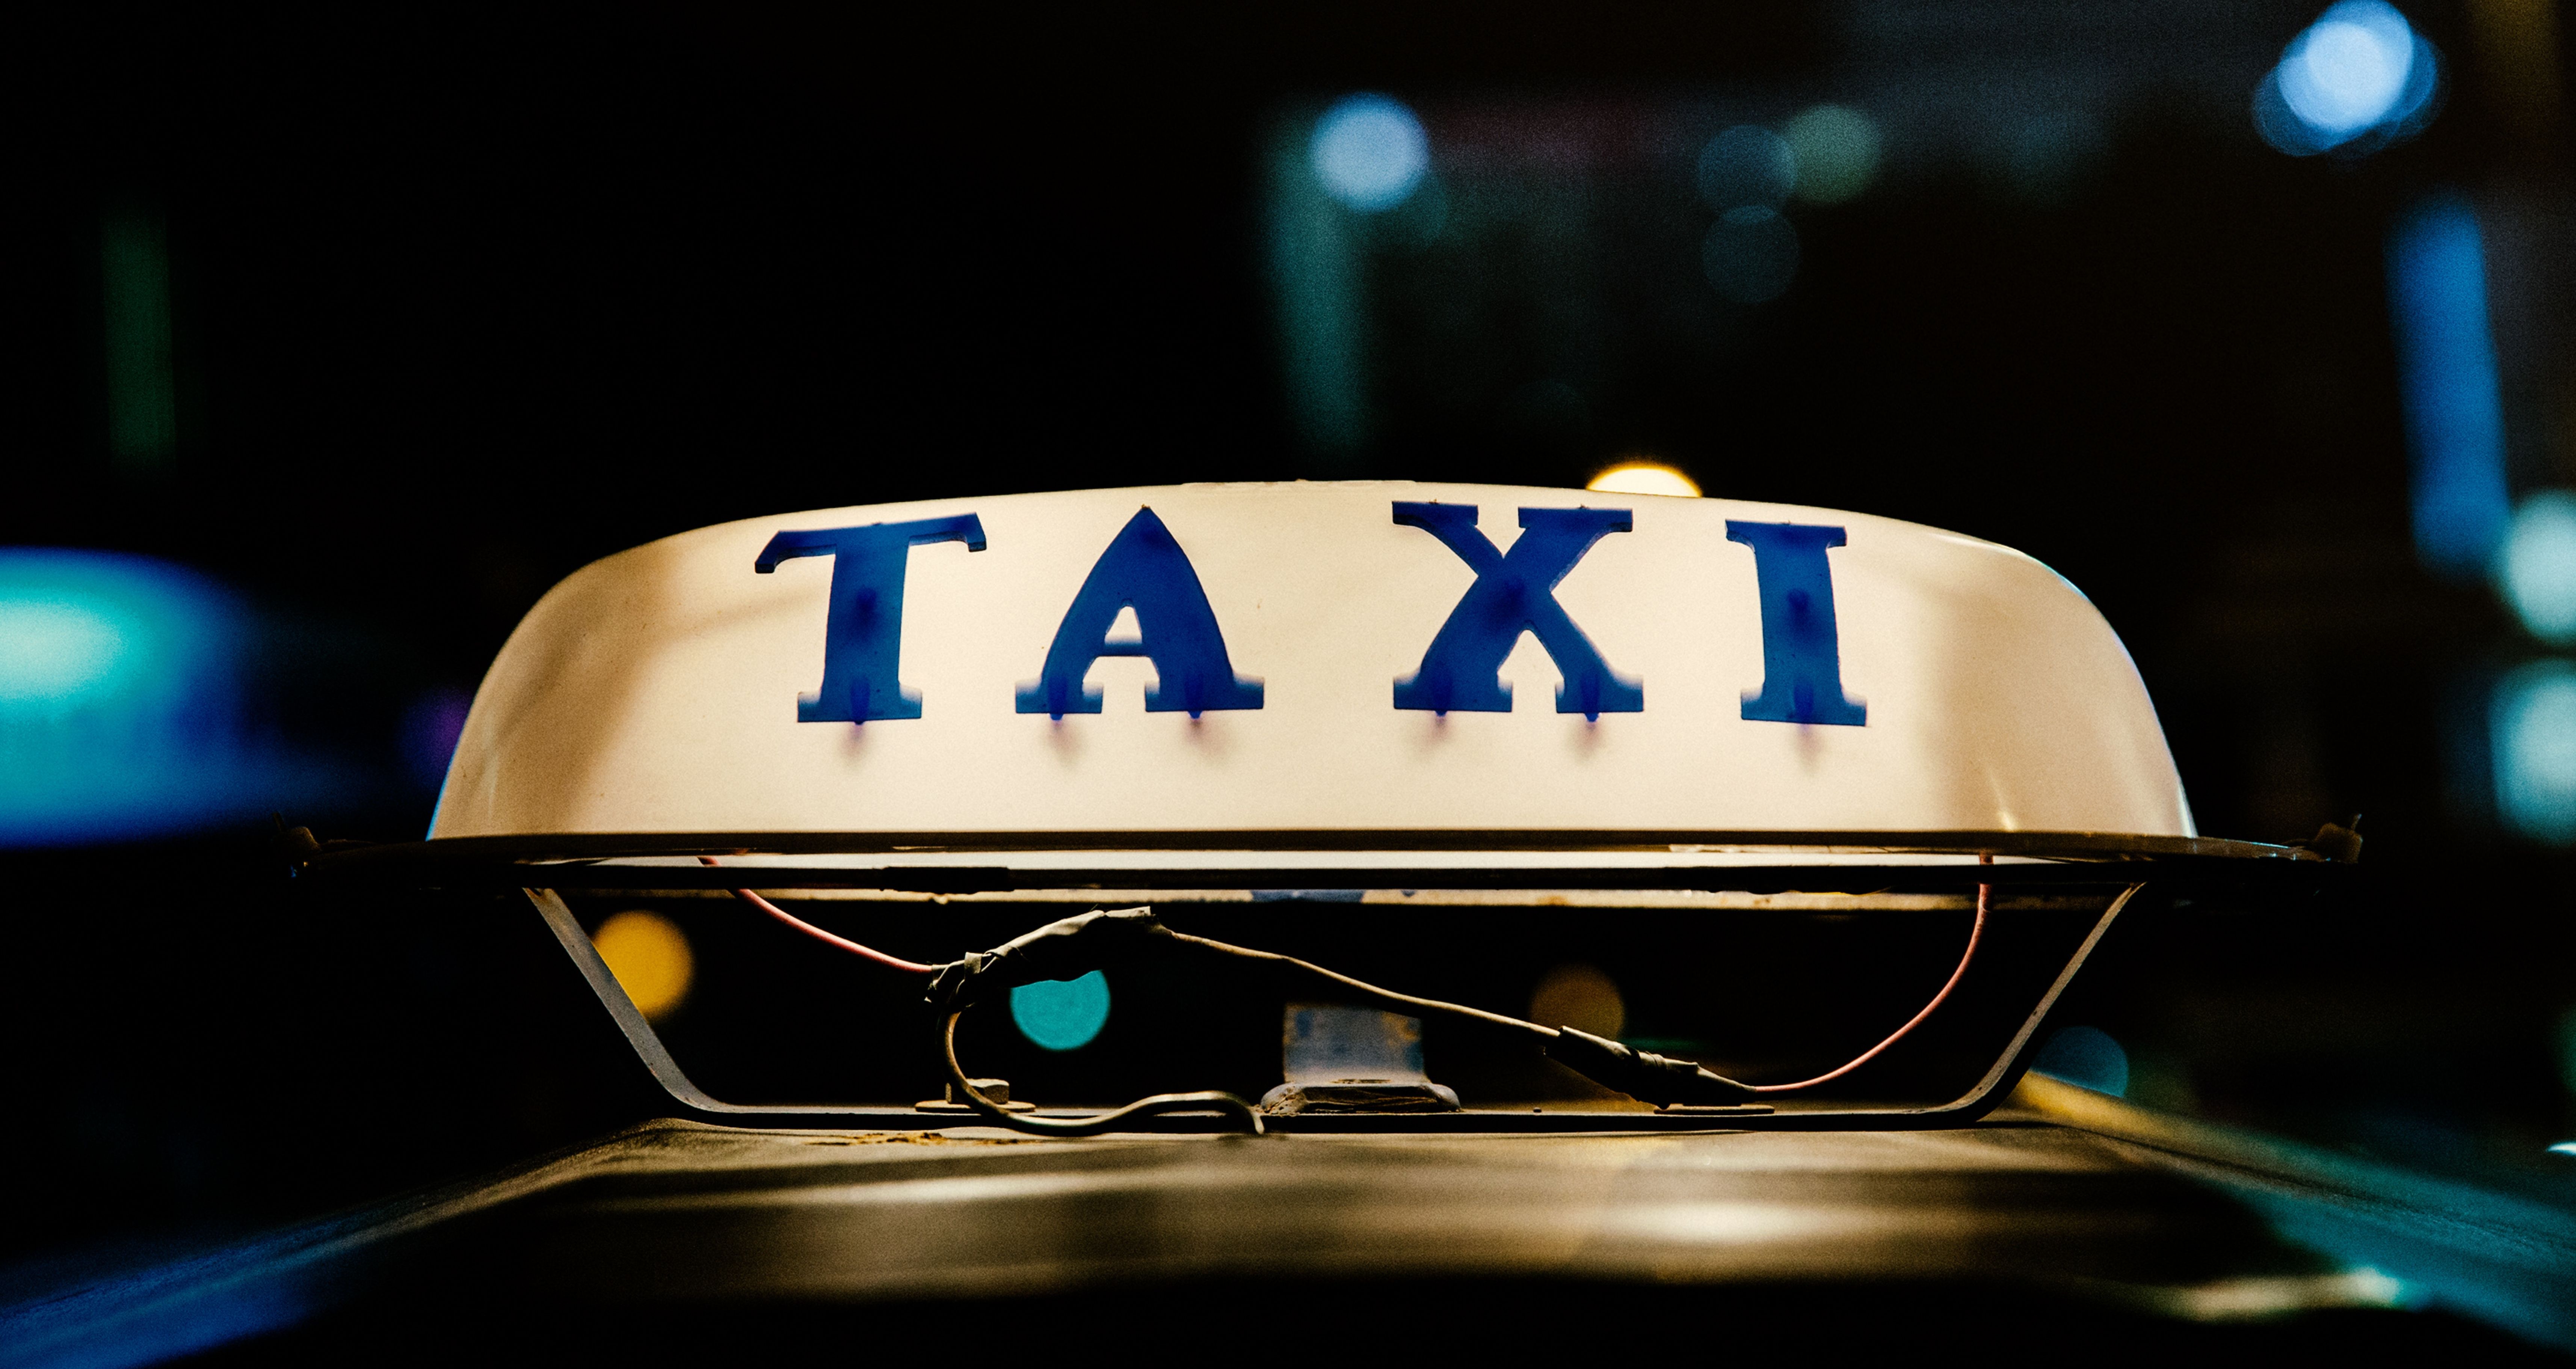 Taxi driver unmet demand survey may 2022